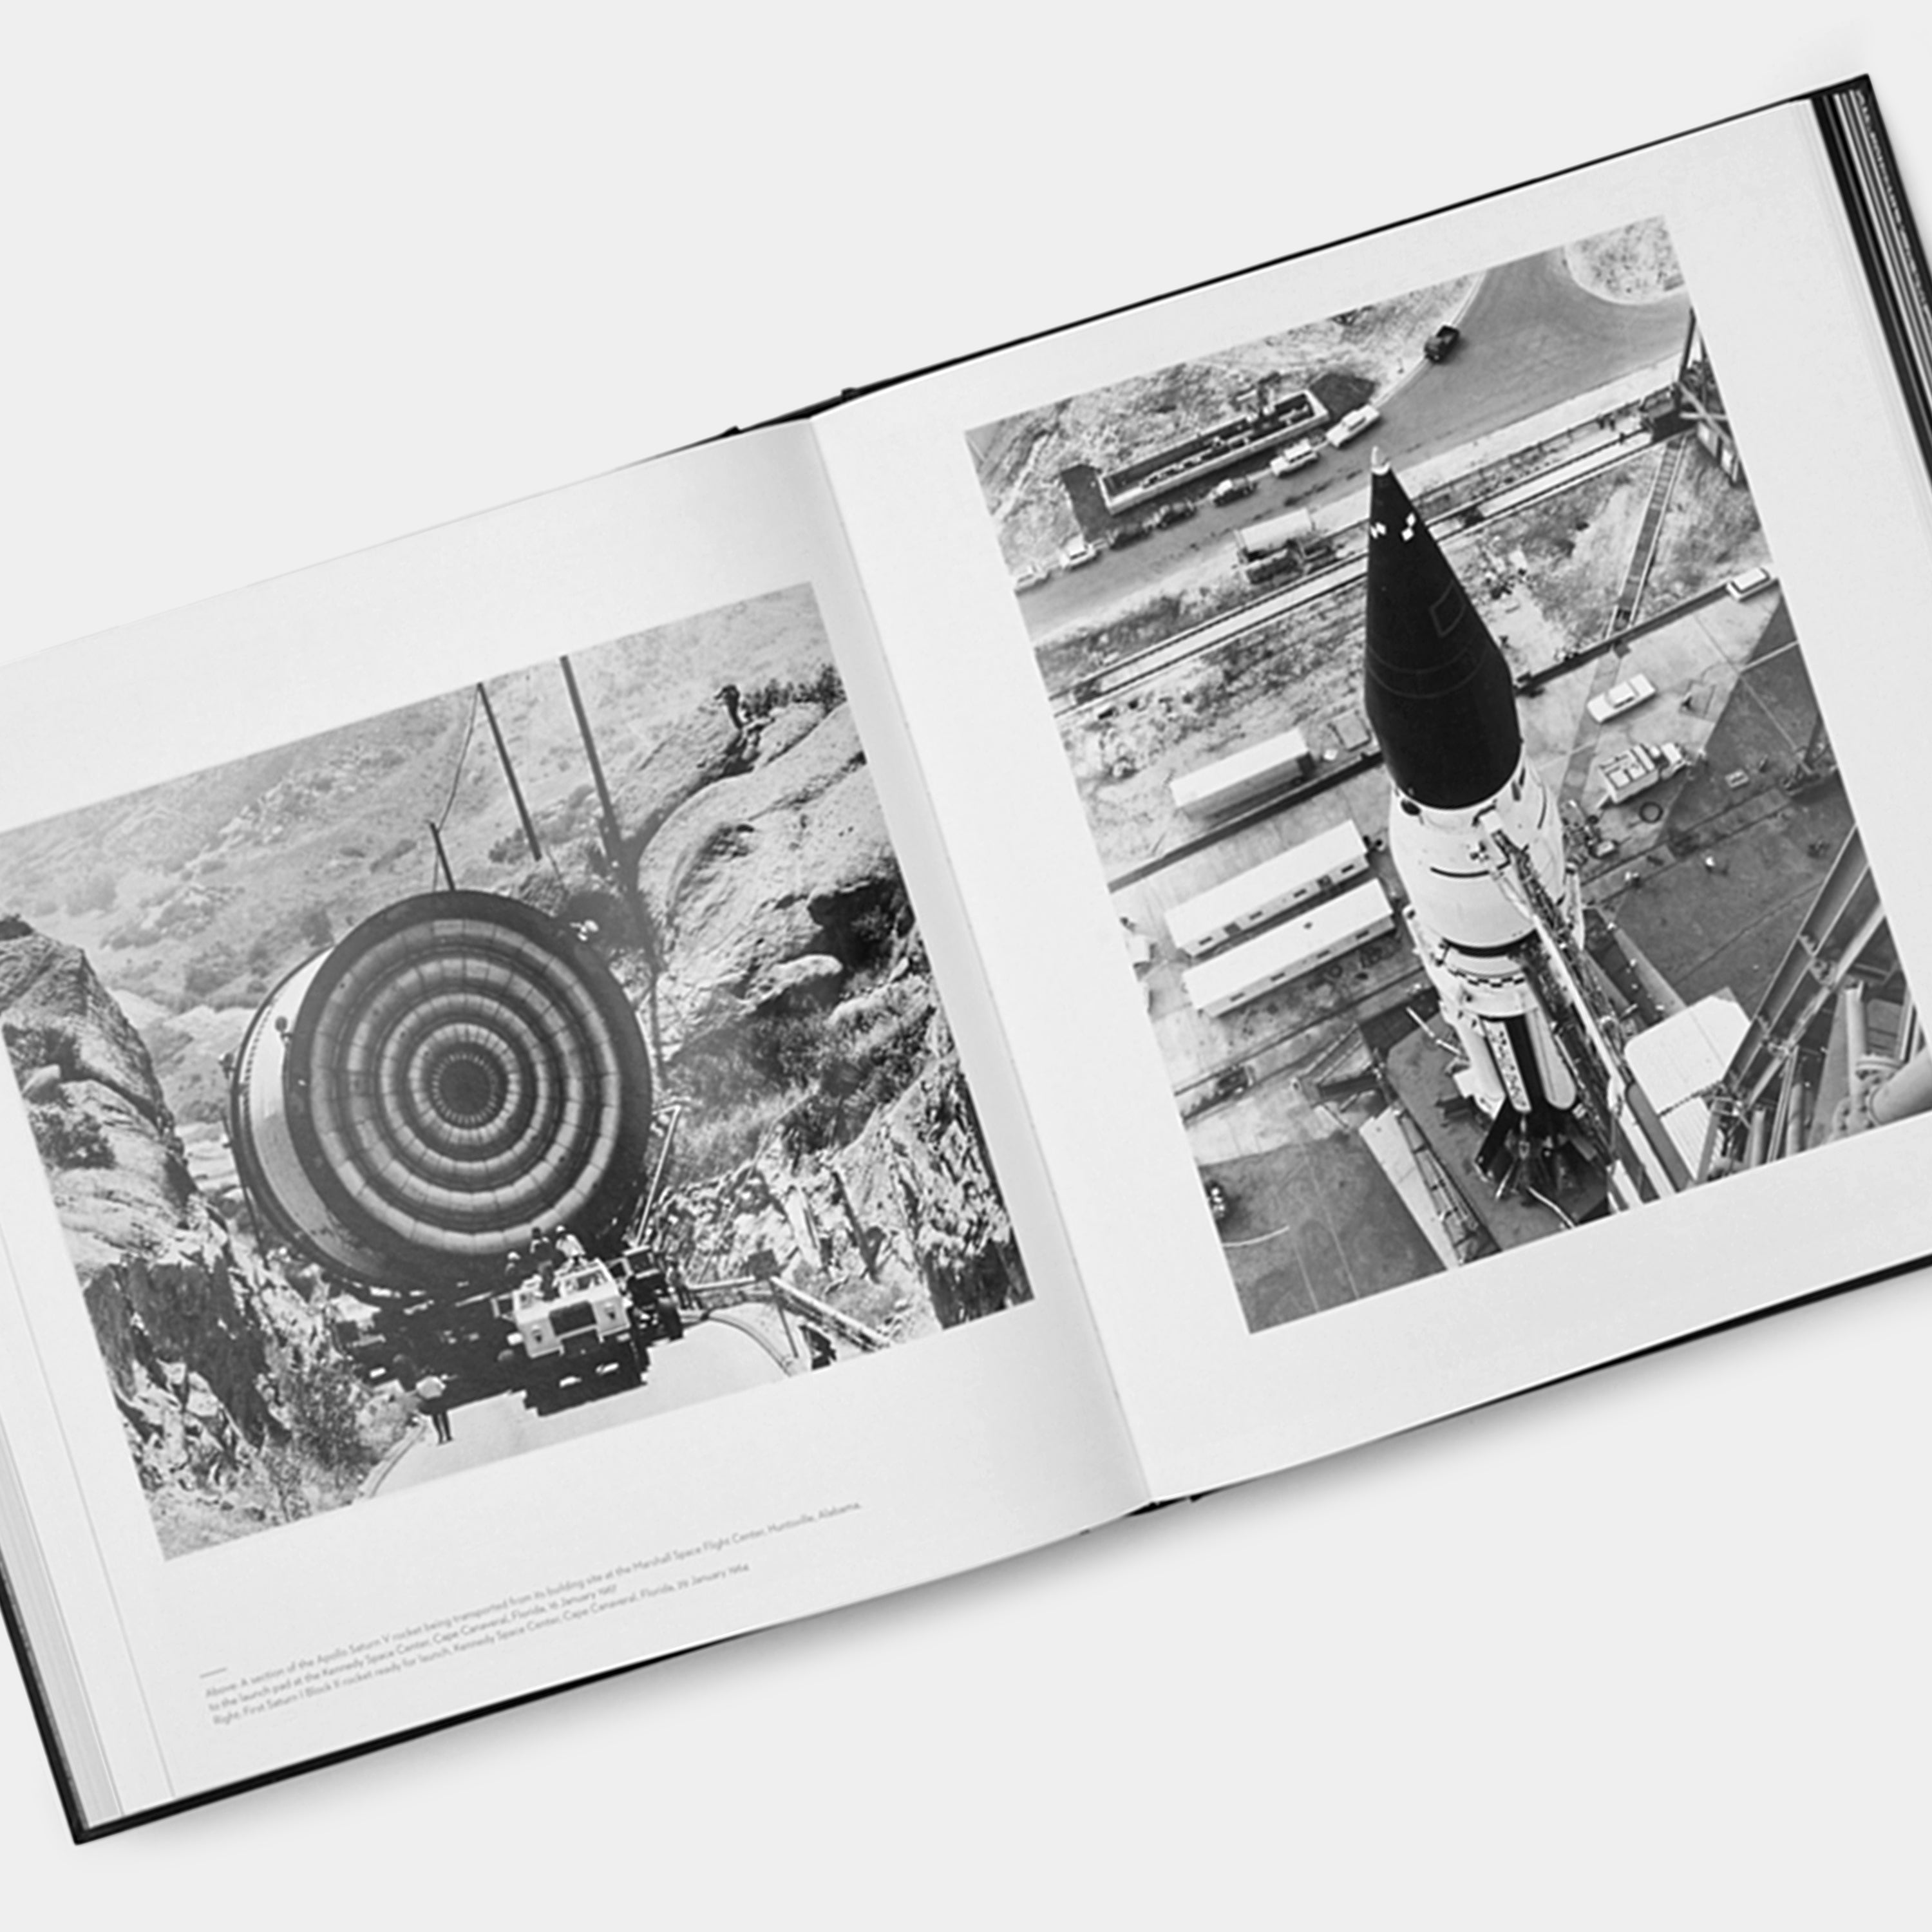 Sun and Moon: A Story of Astronomy, Photography and Cartography Phaidon Book